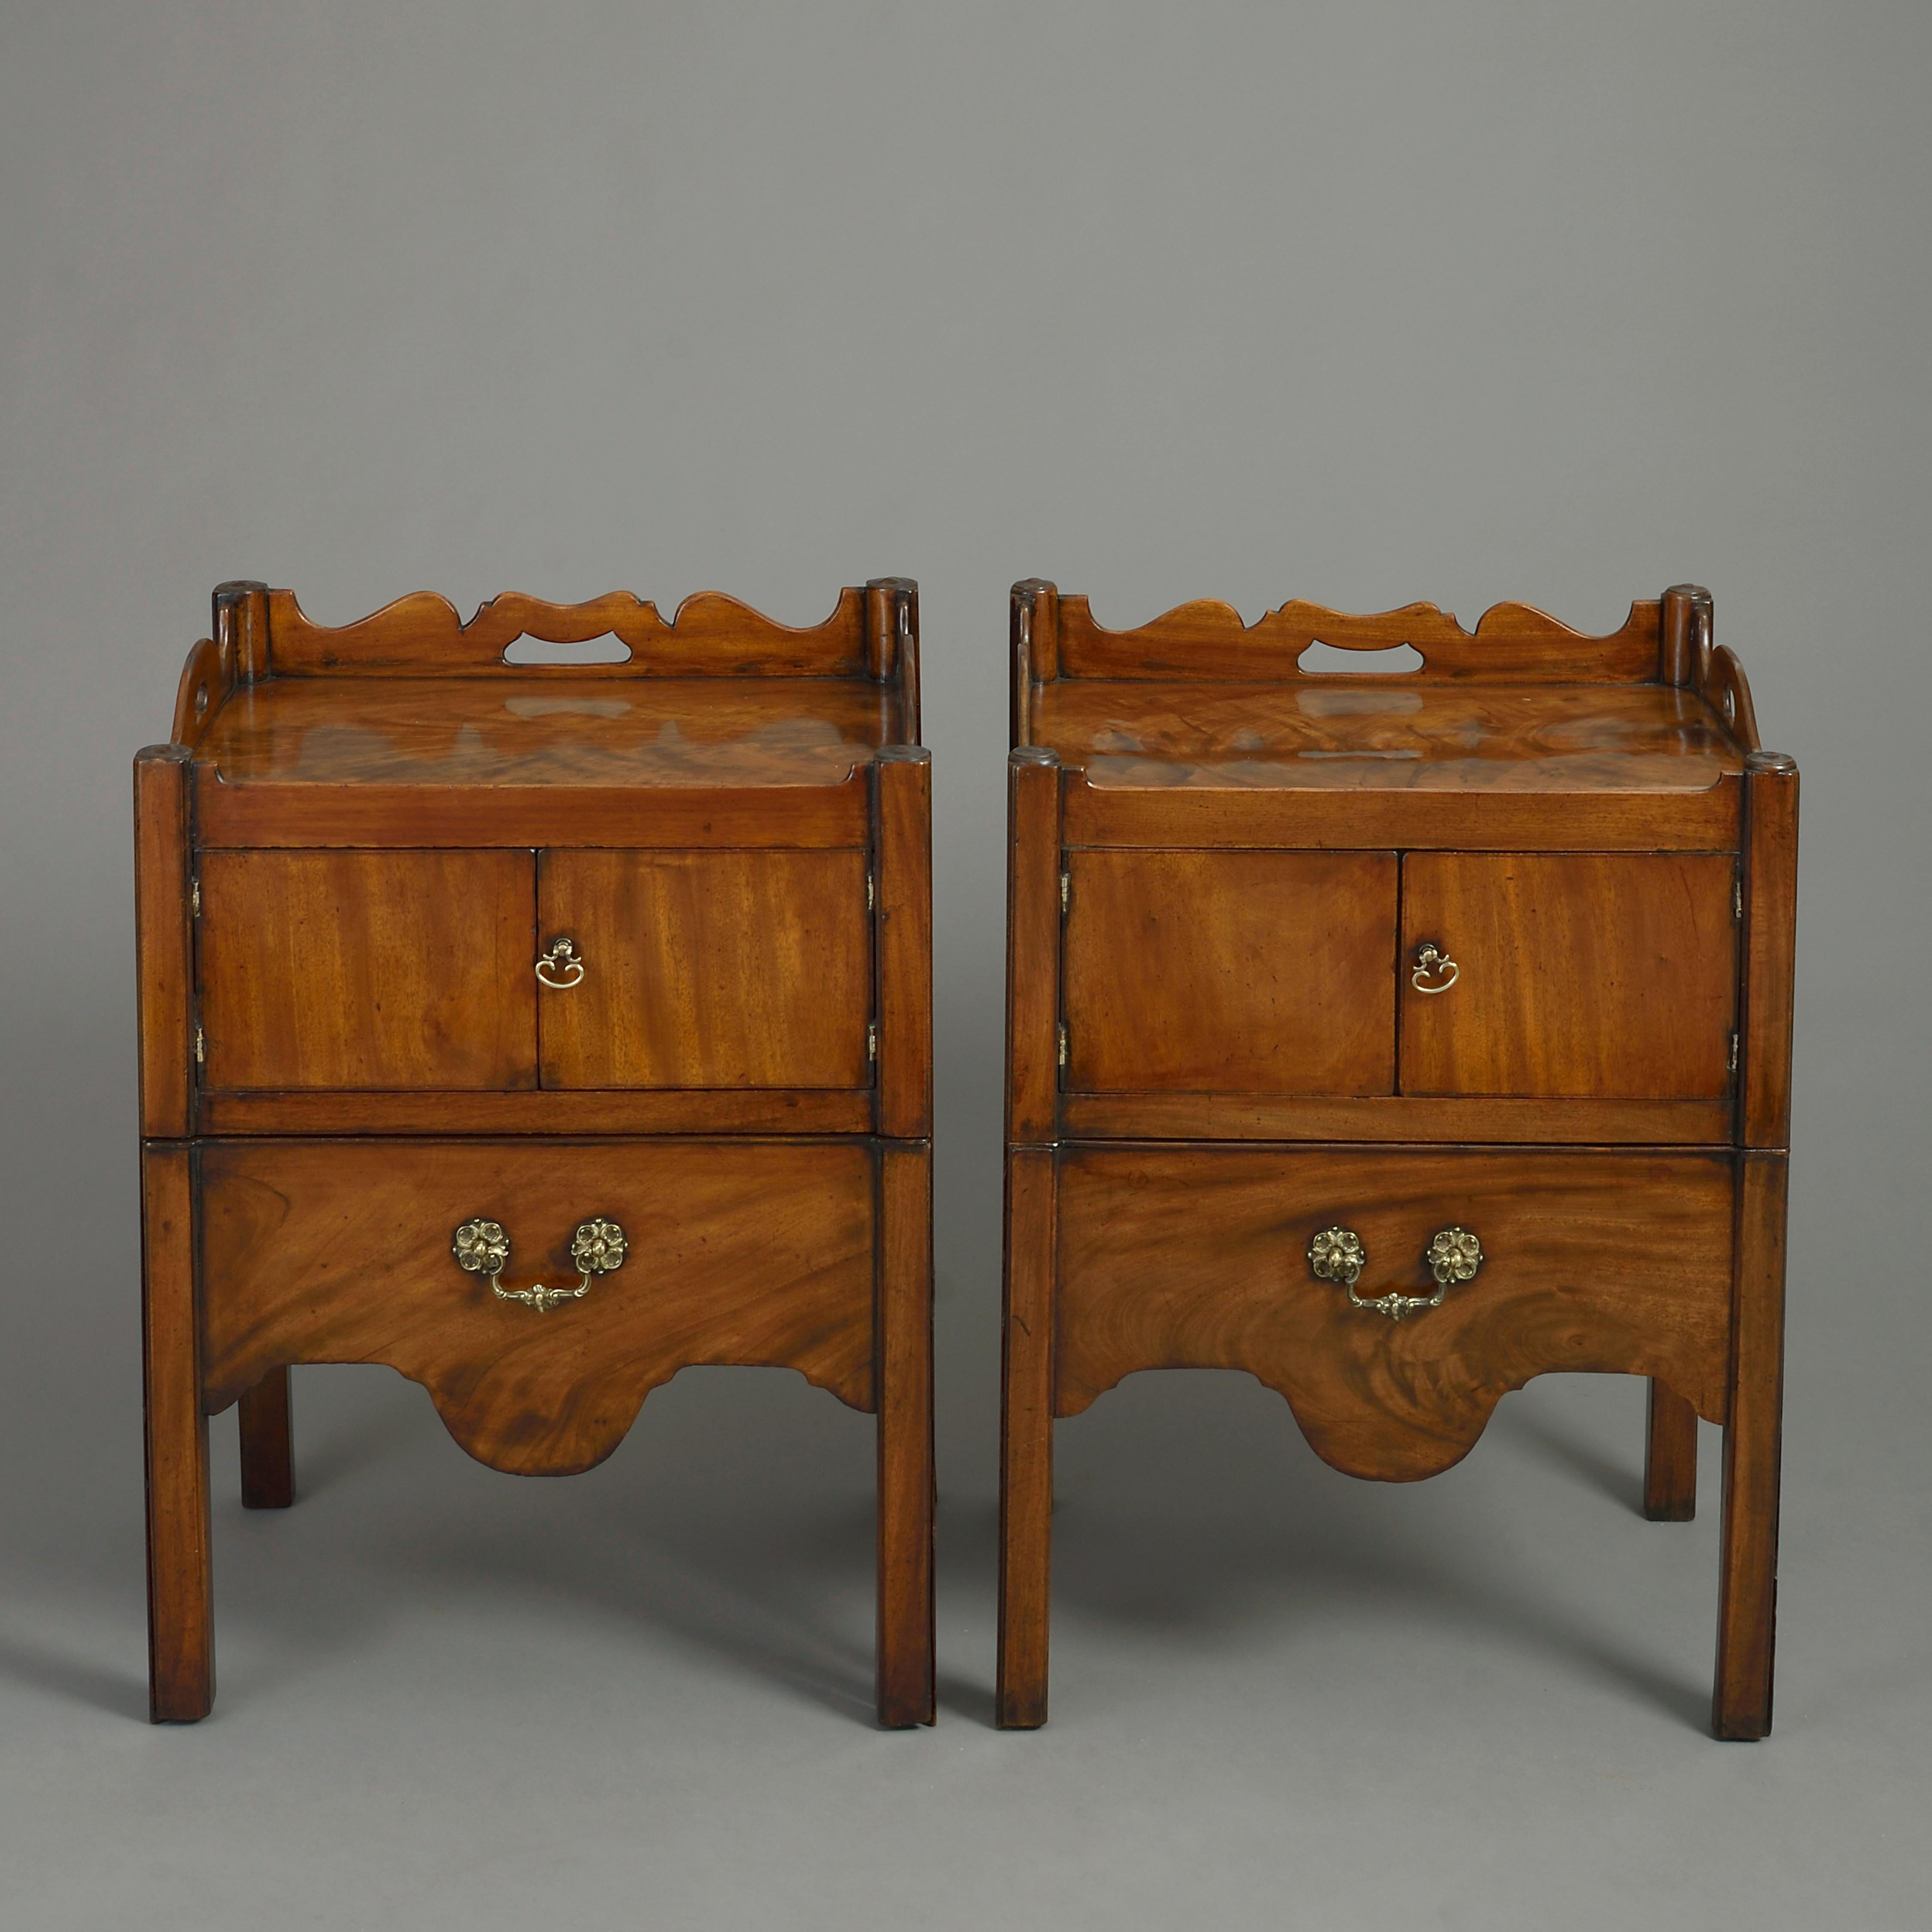 Georgian Pair of 18th Century George III Period Bedside Commodes